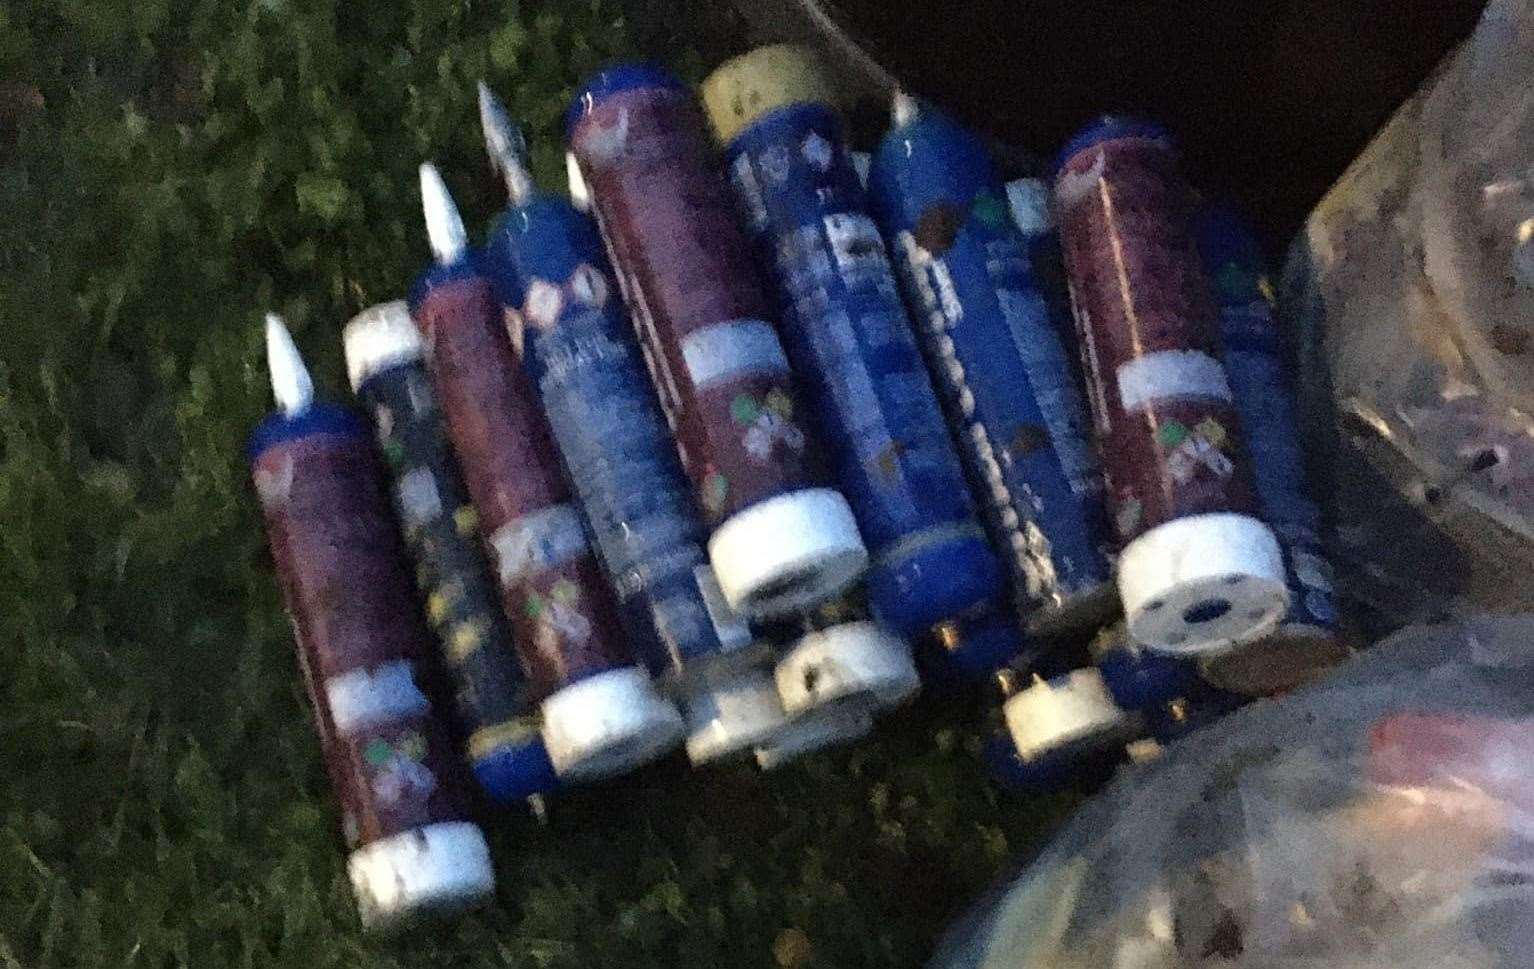 Nitrous Oxide canisters found along Alkerden Lane, Greenhithe (62167146)